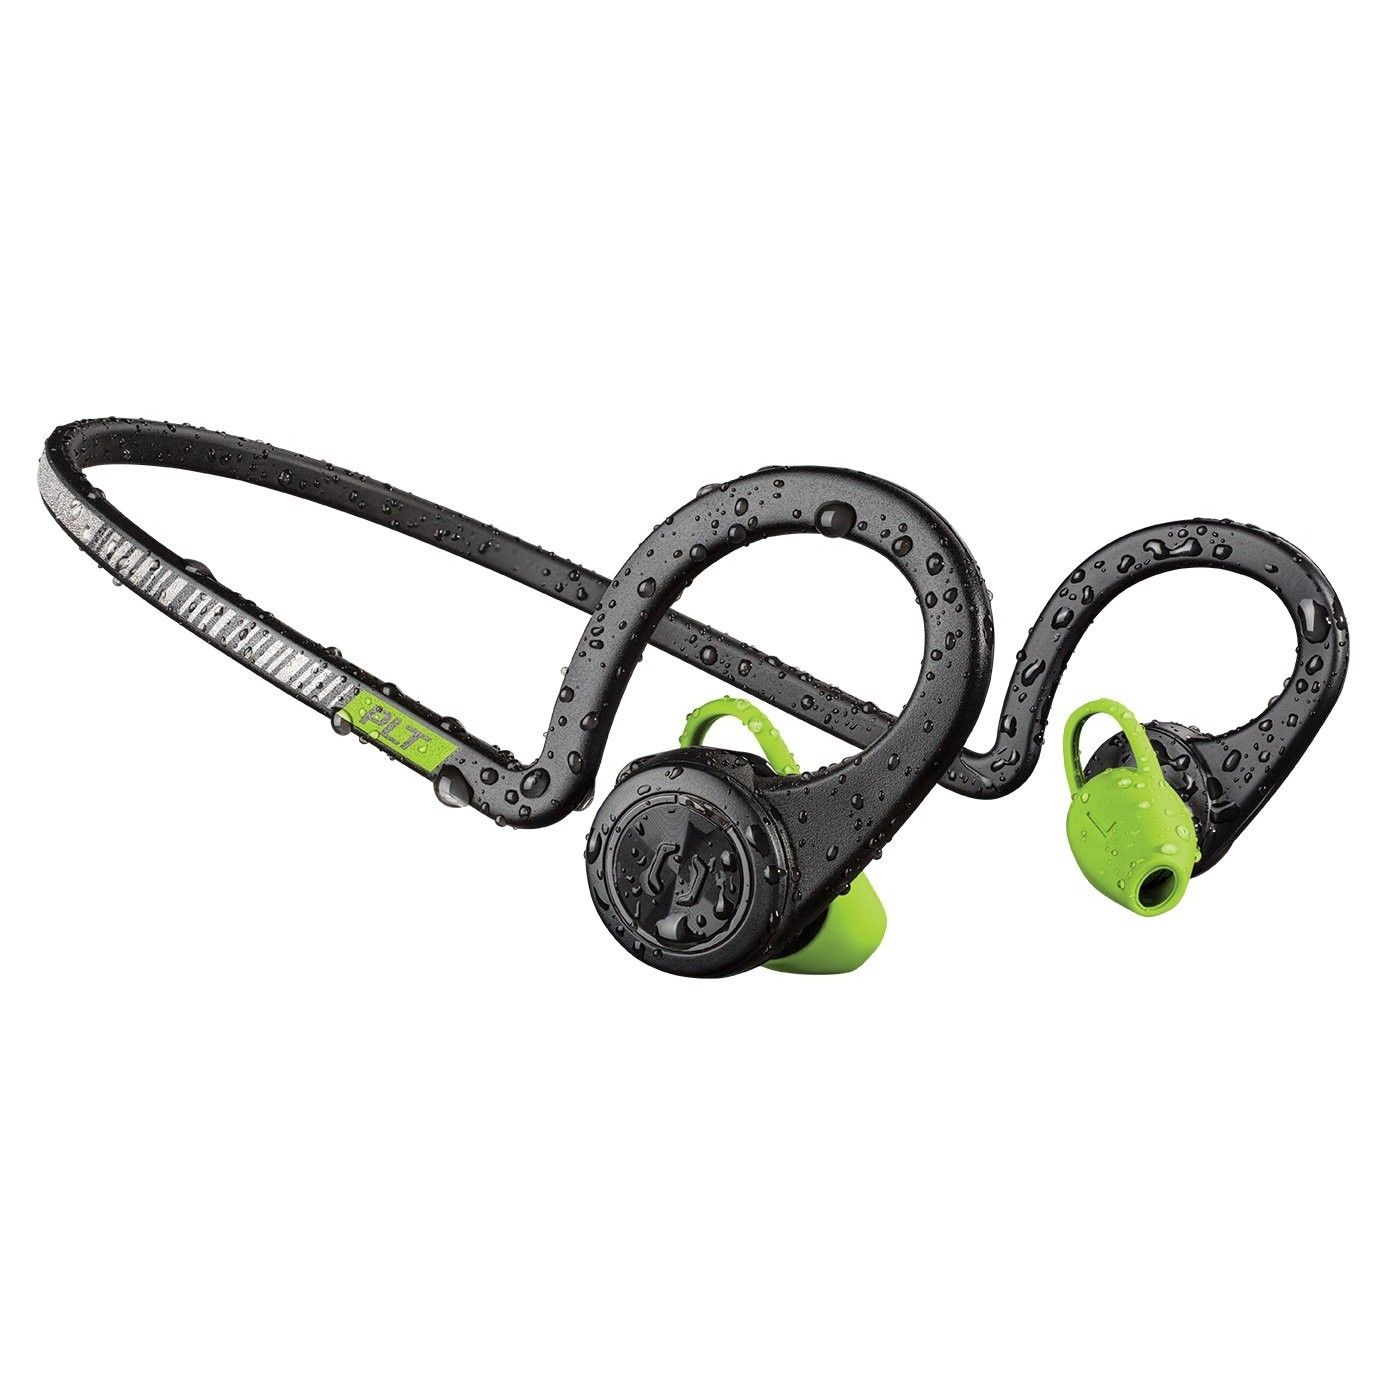 Plantronics BackBeat FIT Wireless Headphones - Waterproof Earbuds with On-Ear Controls for Running and Workout, Black Core